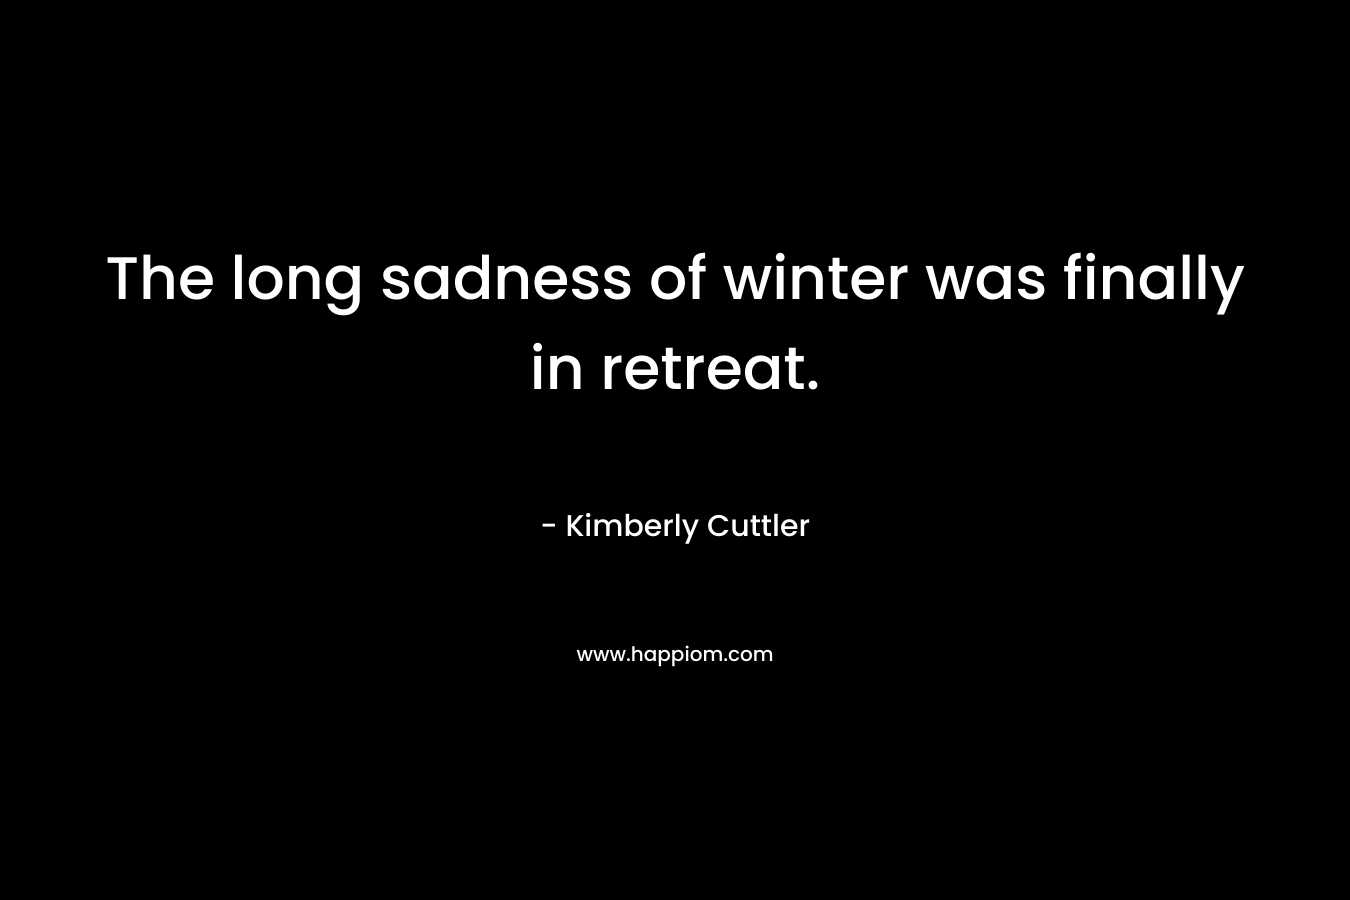 The long sadness of winter was finally in retreat.